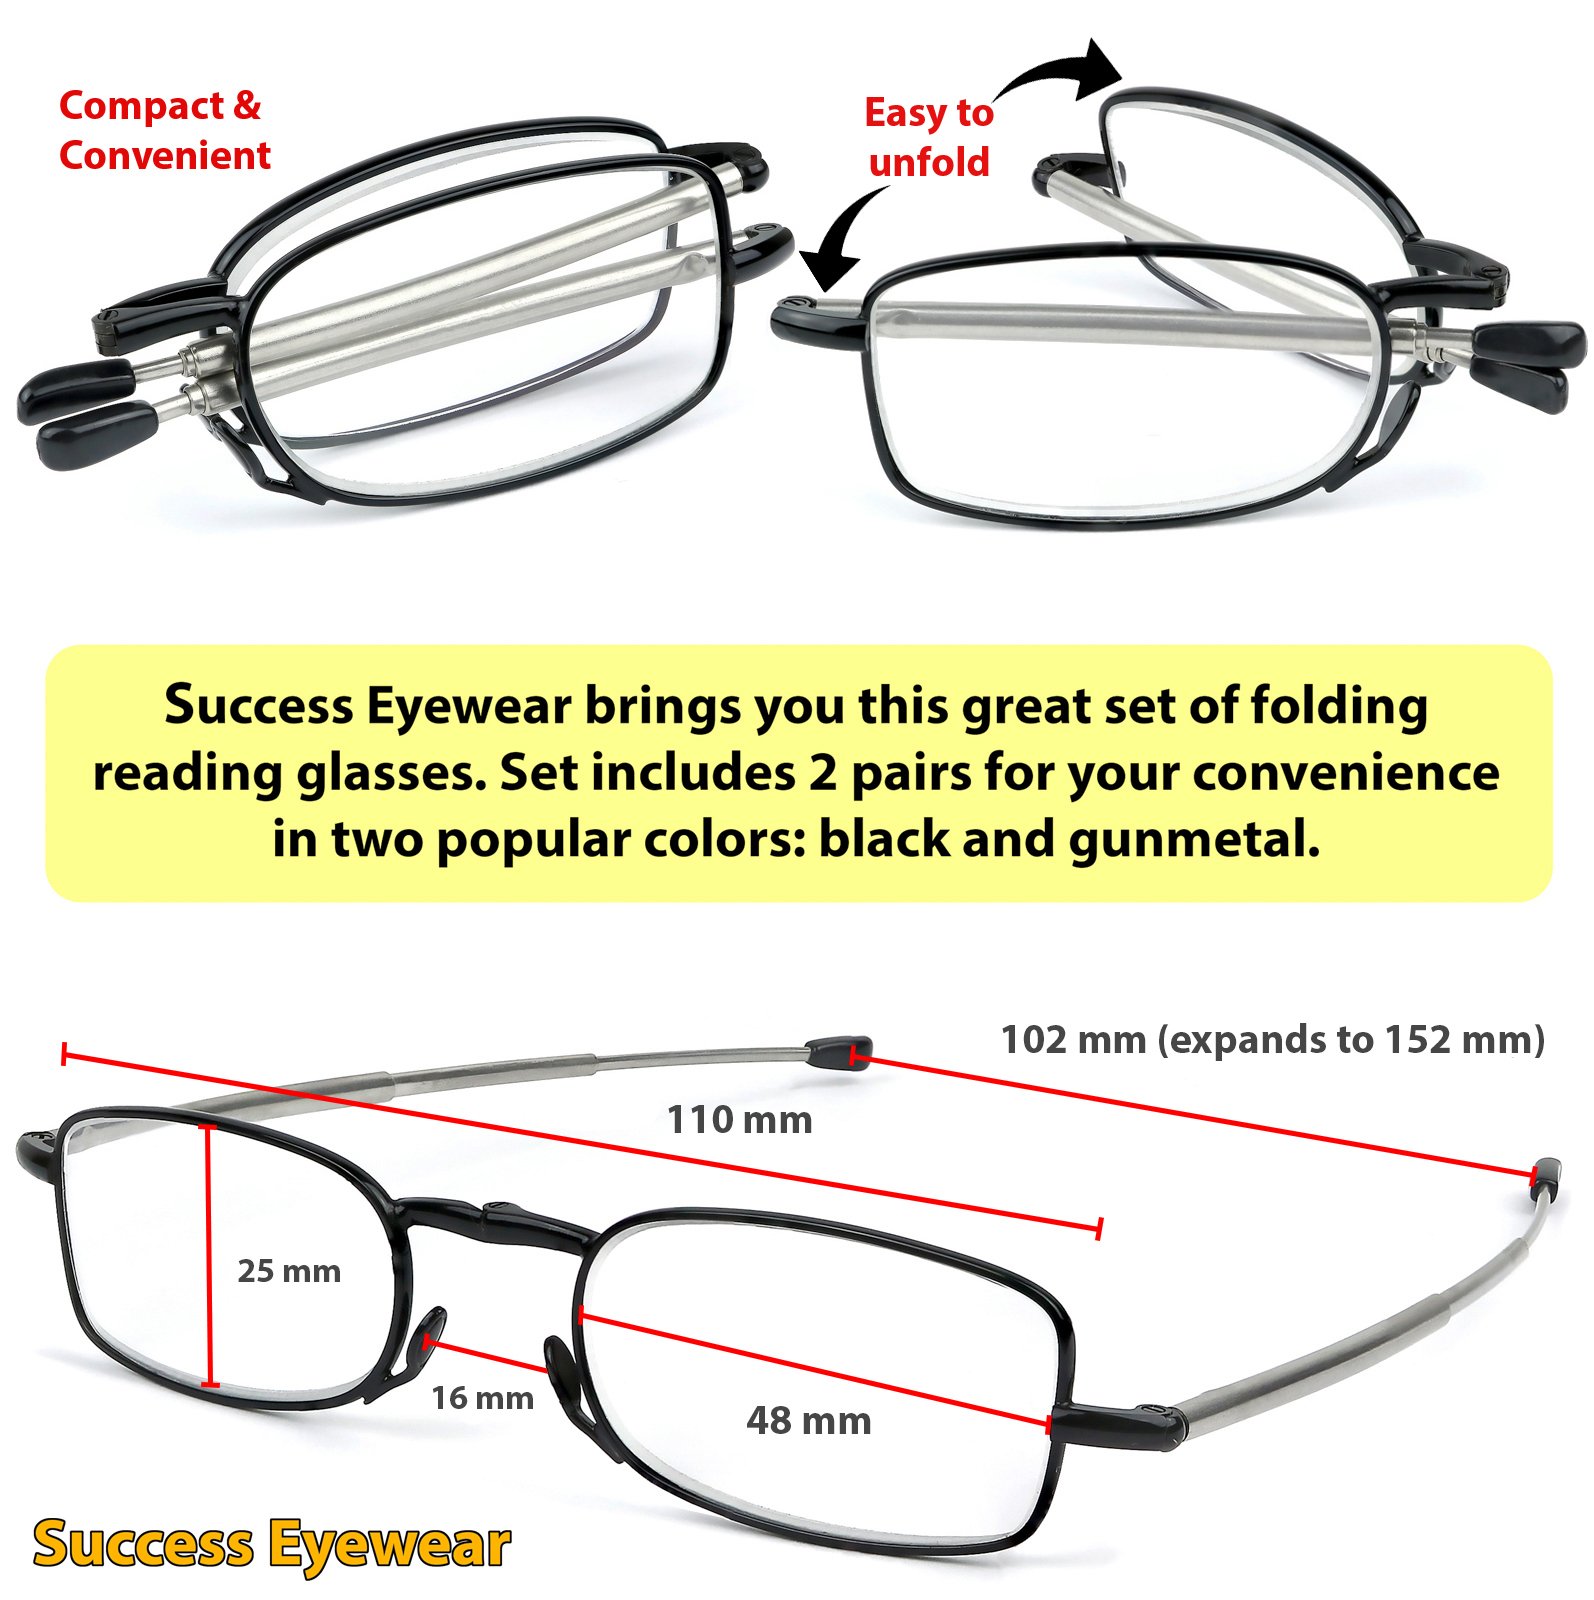 Success Eyewear Reading Glasses 2 Pair Black and Gunmetal Readers Compact Folding Unisex Glasses for Reading Case Included